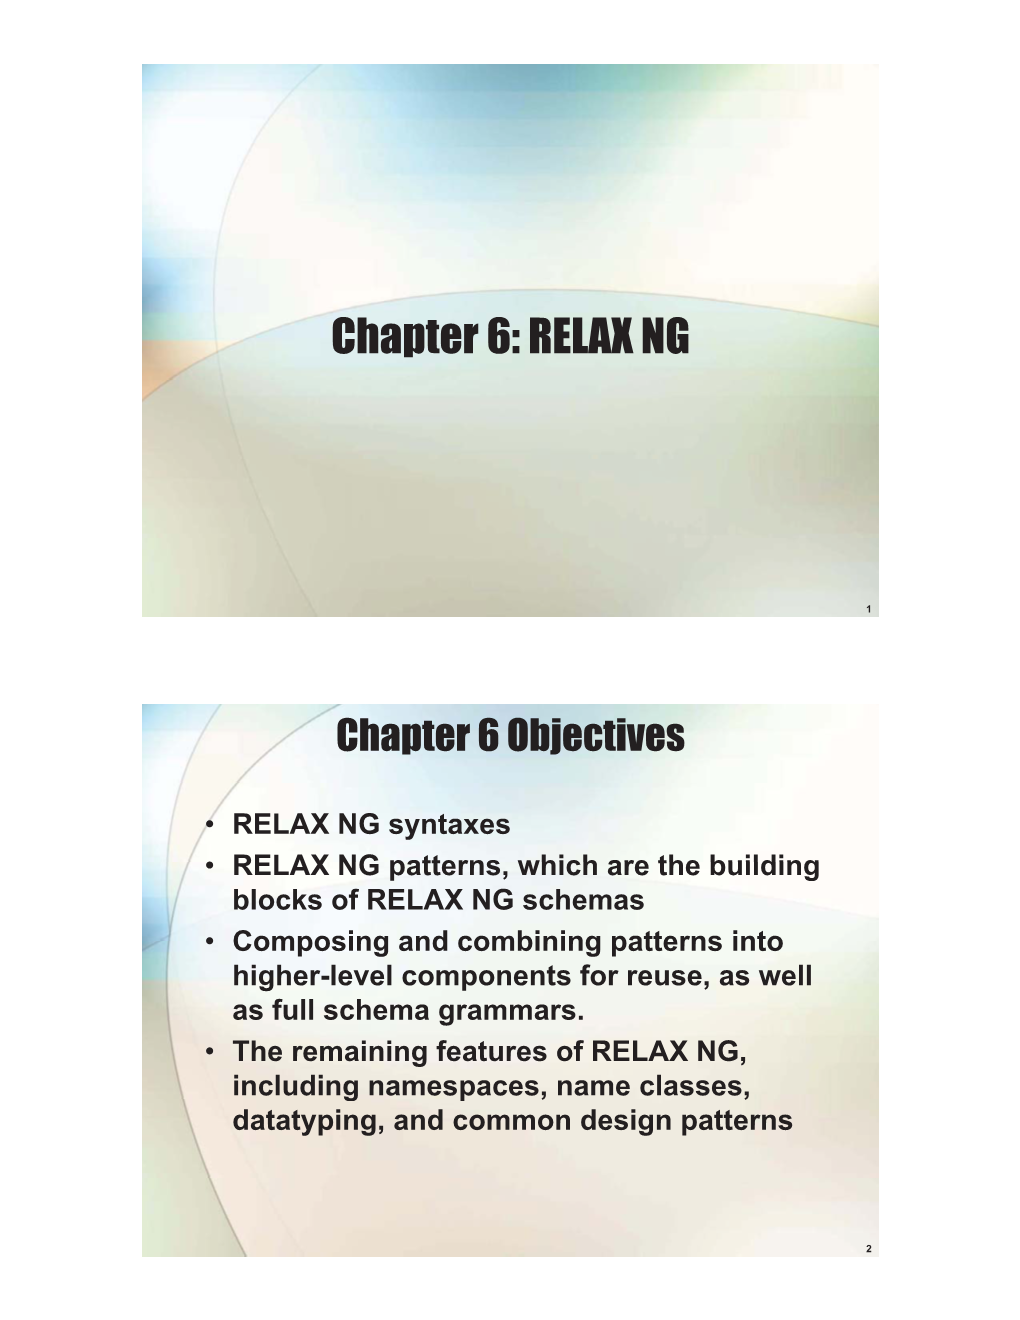 Chapter 6: RELAX NG